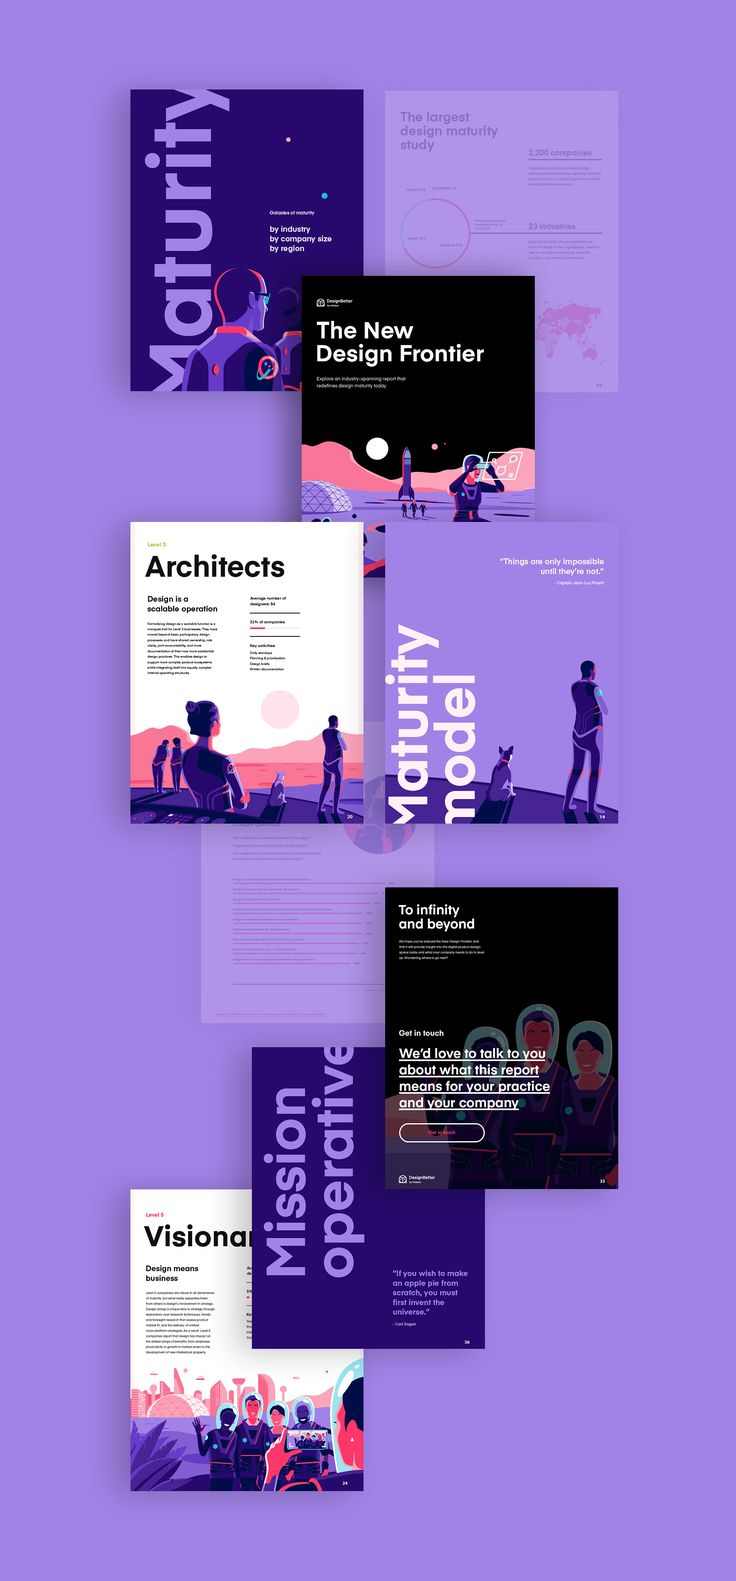 several different types of brochures are shown in purple and black, with the same color